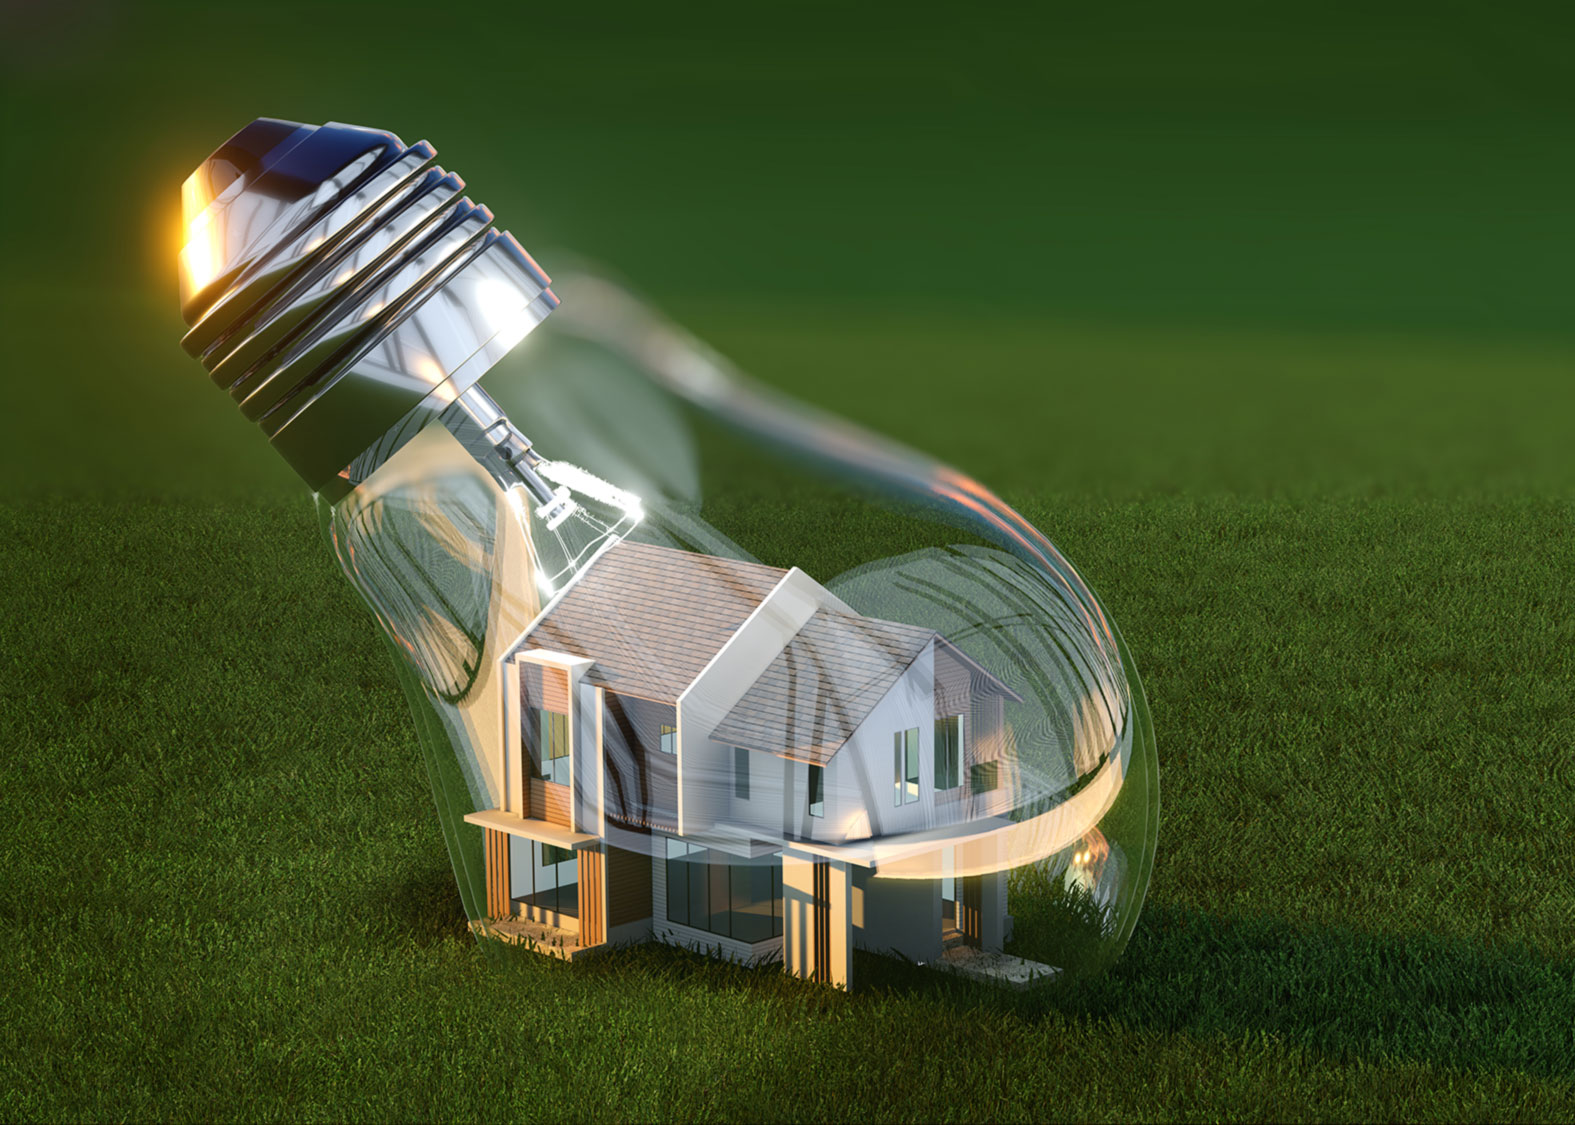 Architectural Tips to Consider for an Energy-Efficient Home